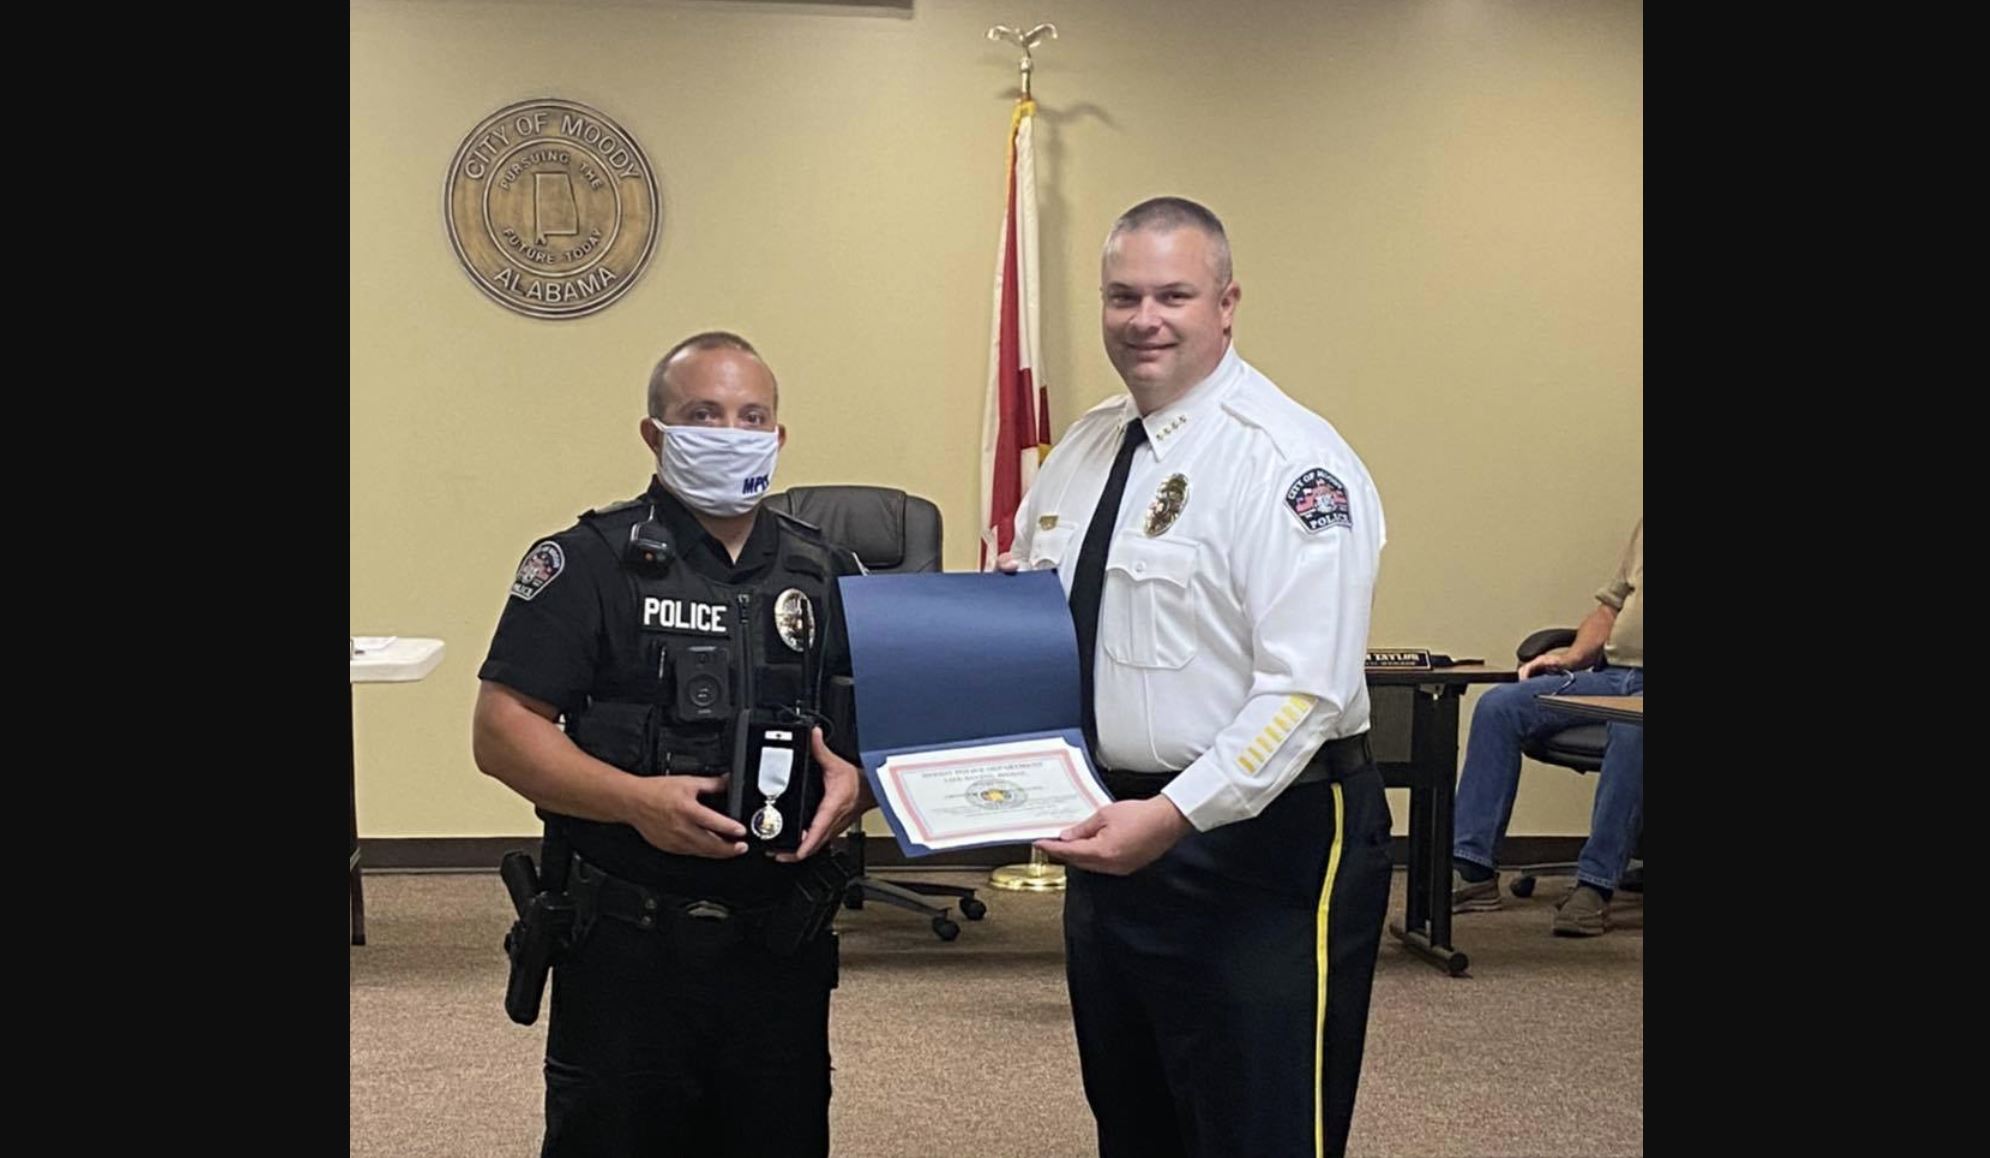 Moody police officer awarded for saving life of burglary suspect